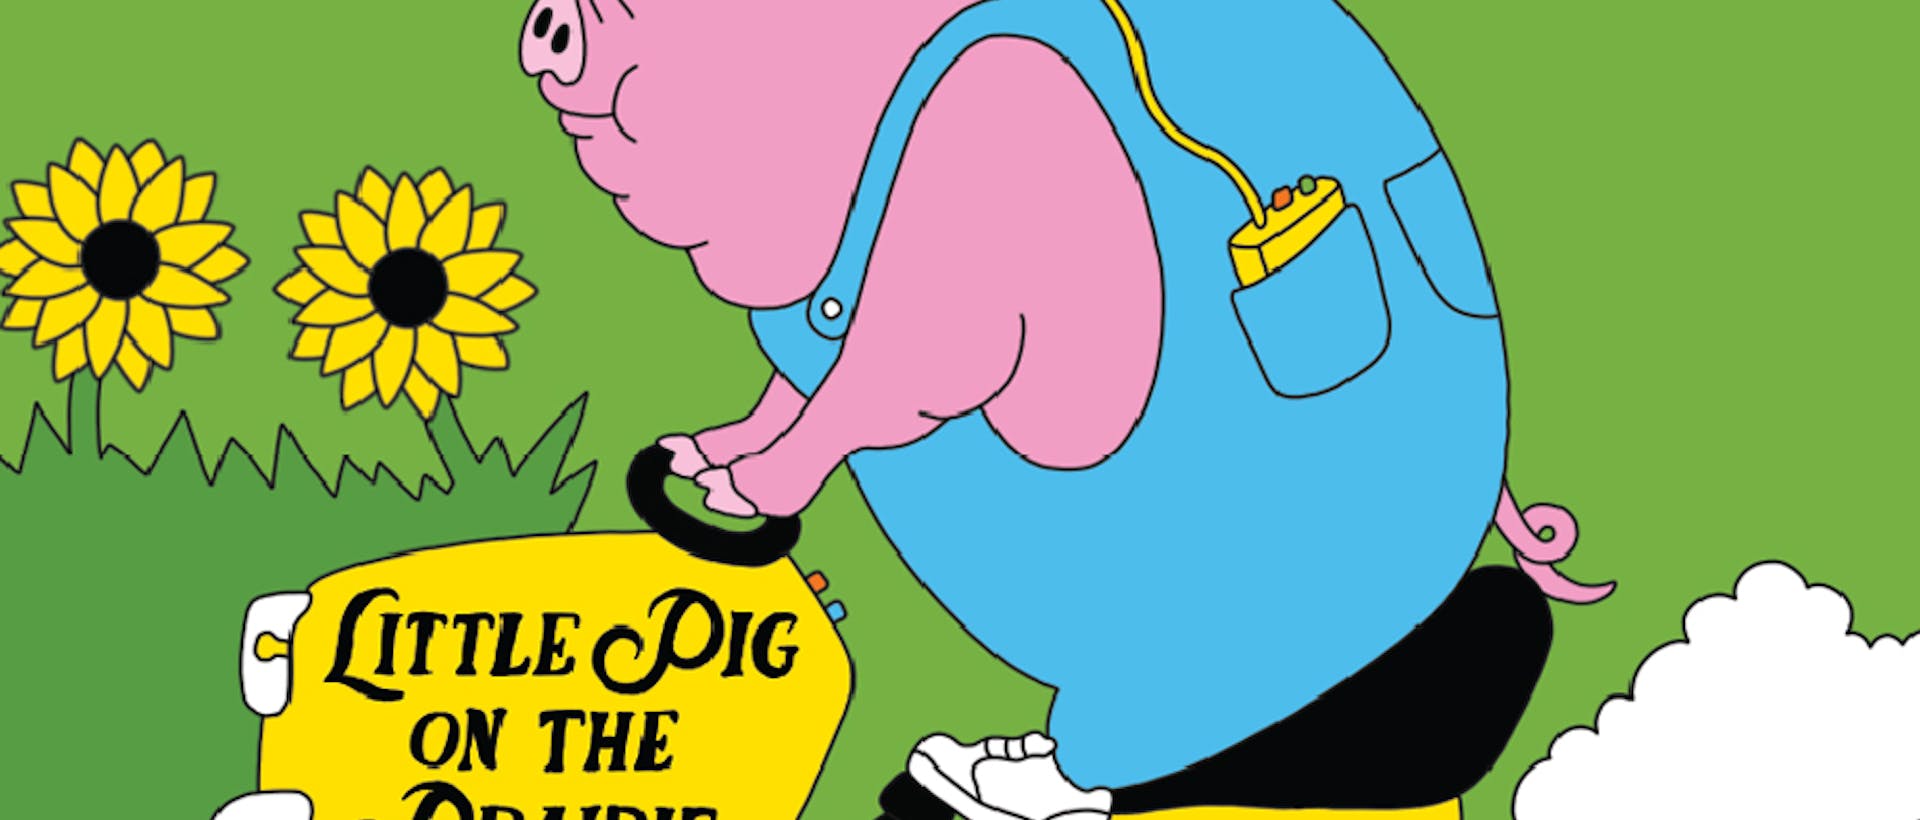 Cartoon of a pig wearing headphones and overalls, riding a lawnmower that reads, "Little Pig on the Prairie"